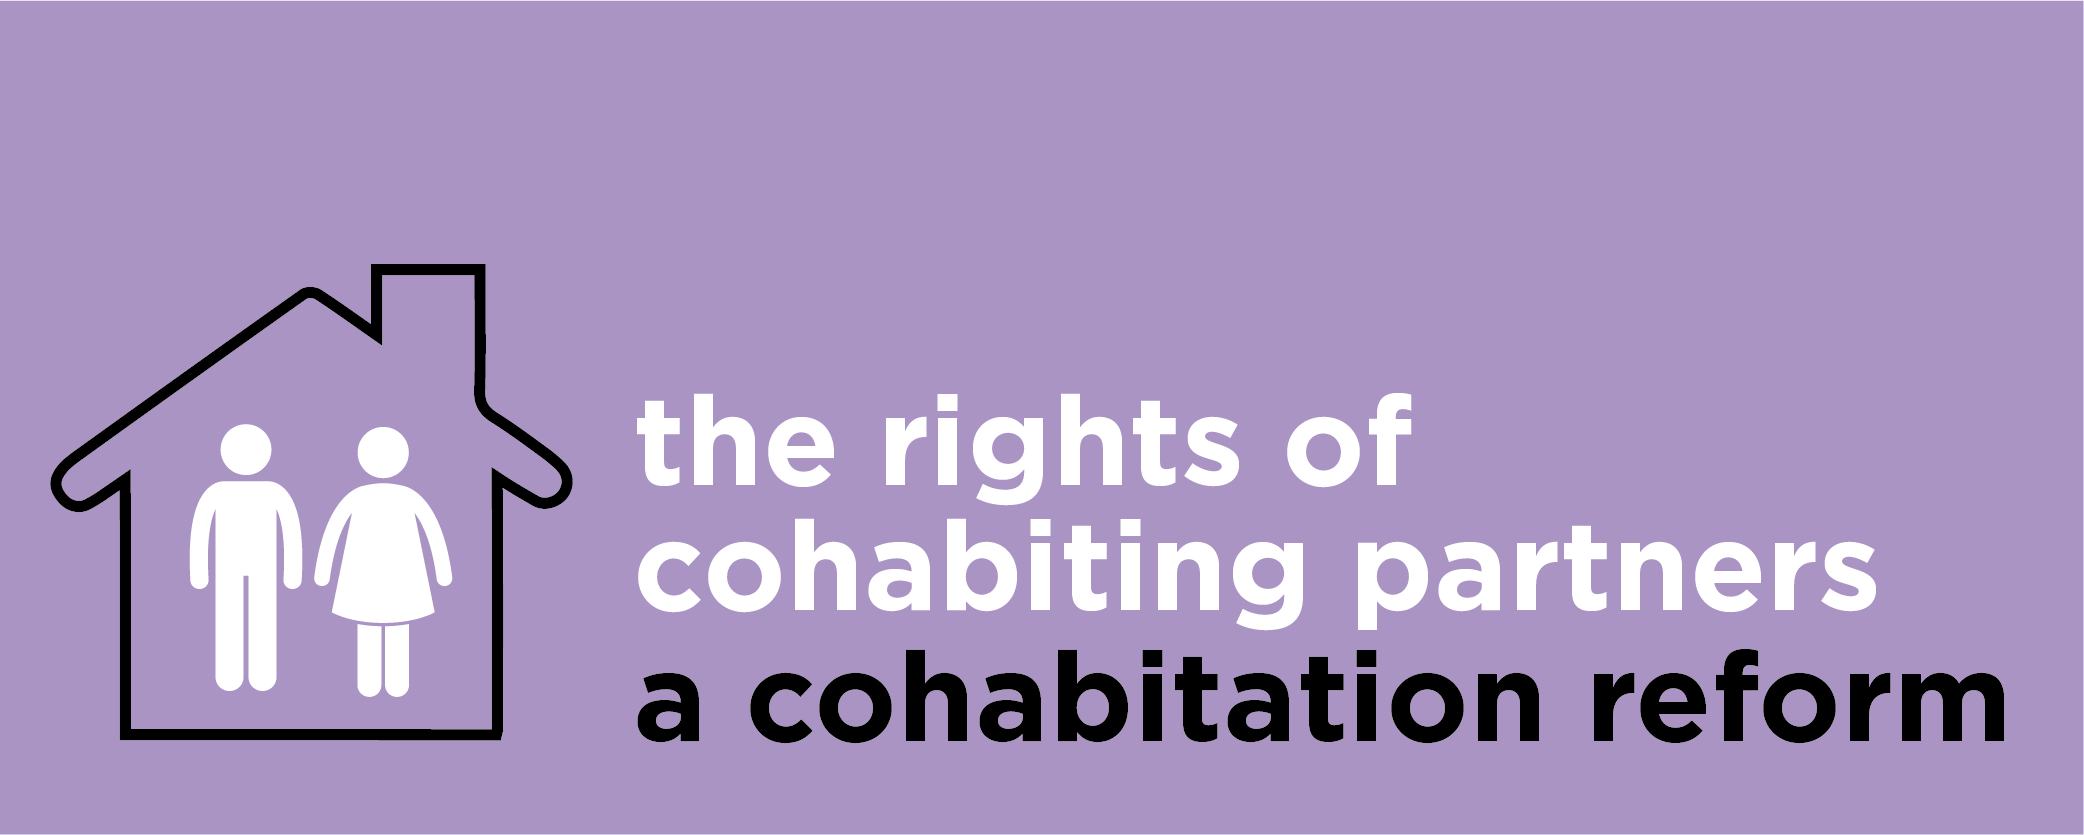 The rights of cohabiting partners - A Cohabitation Reform